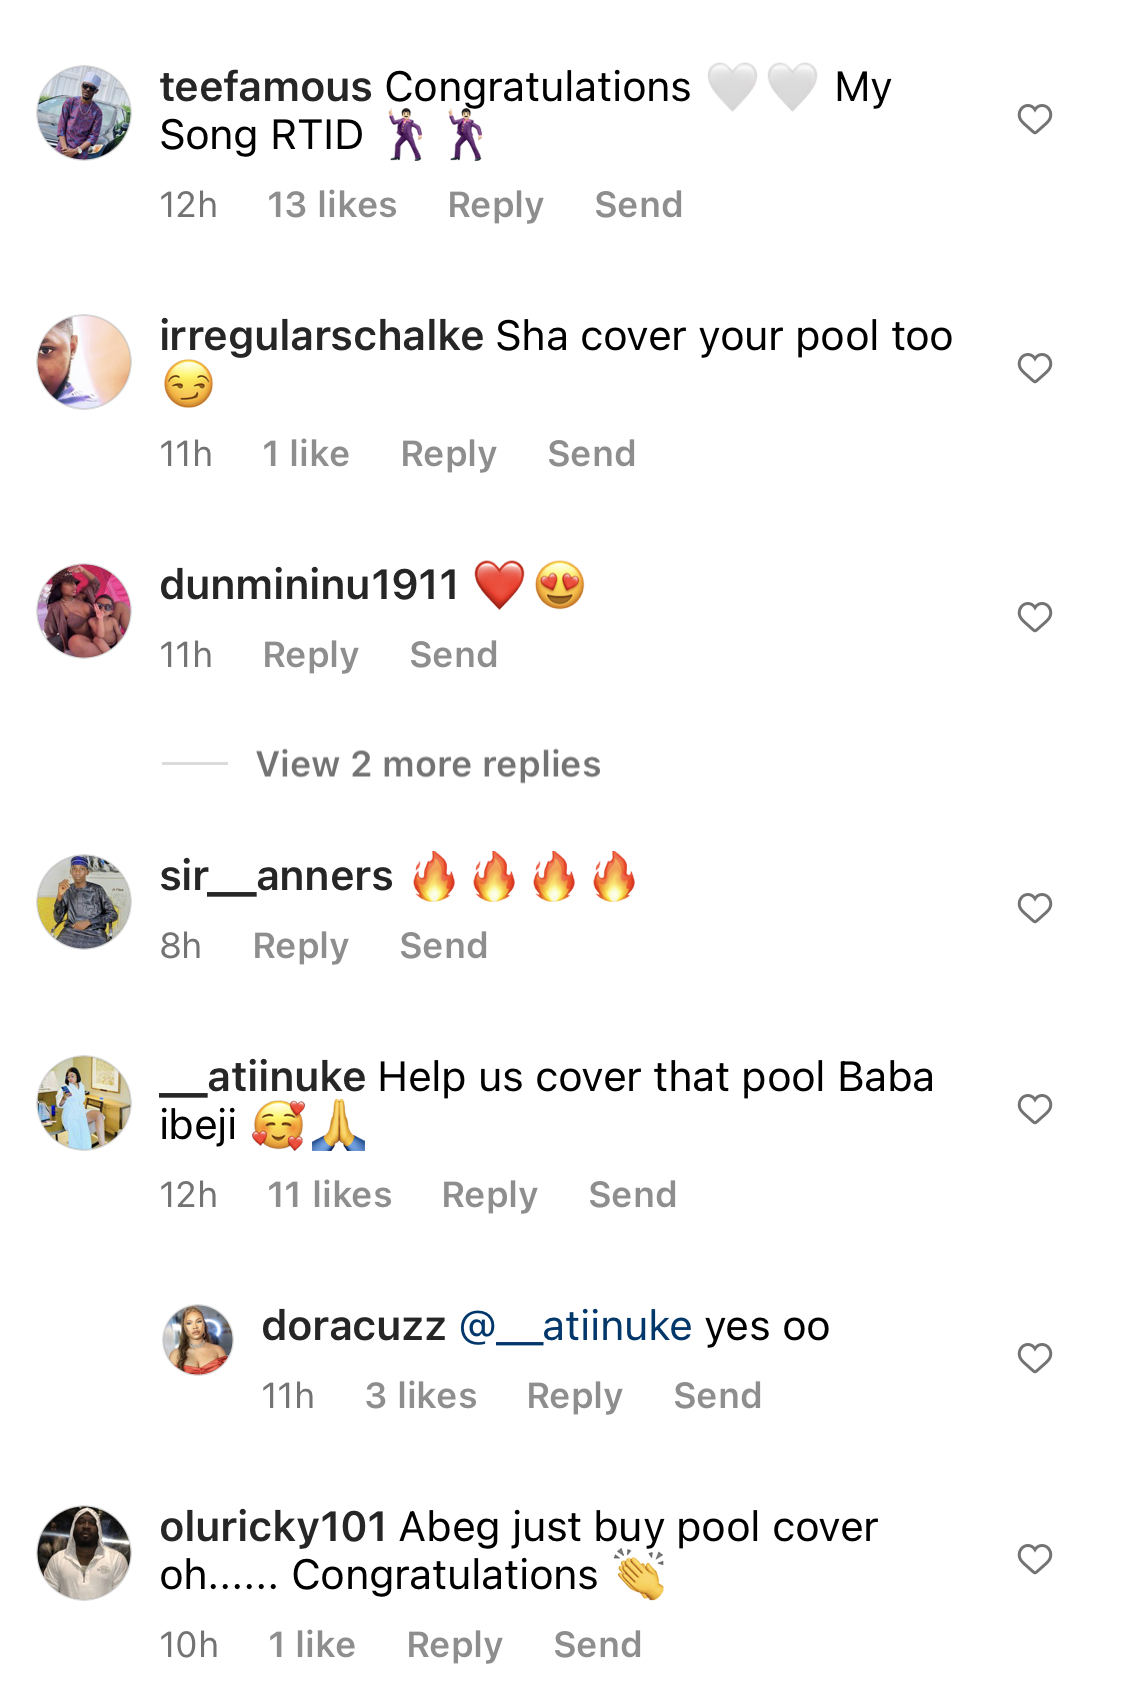 Cover it, you have little kids too - Kizz Daniel warned as he shows off large swimming pool inside mansion [video]